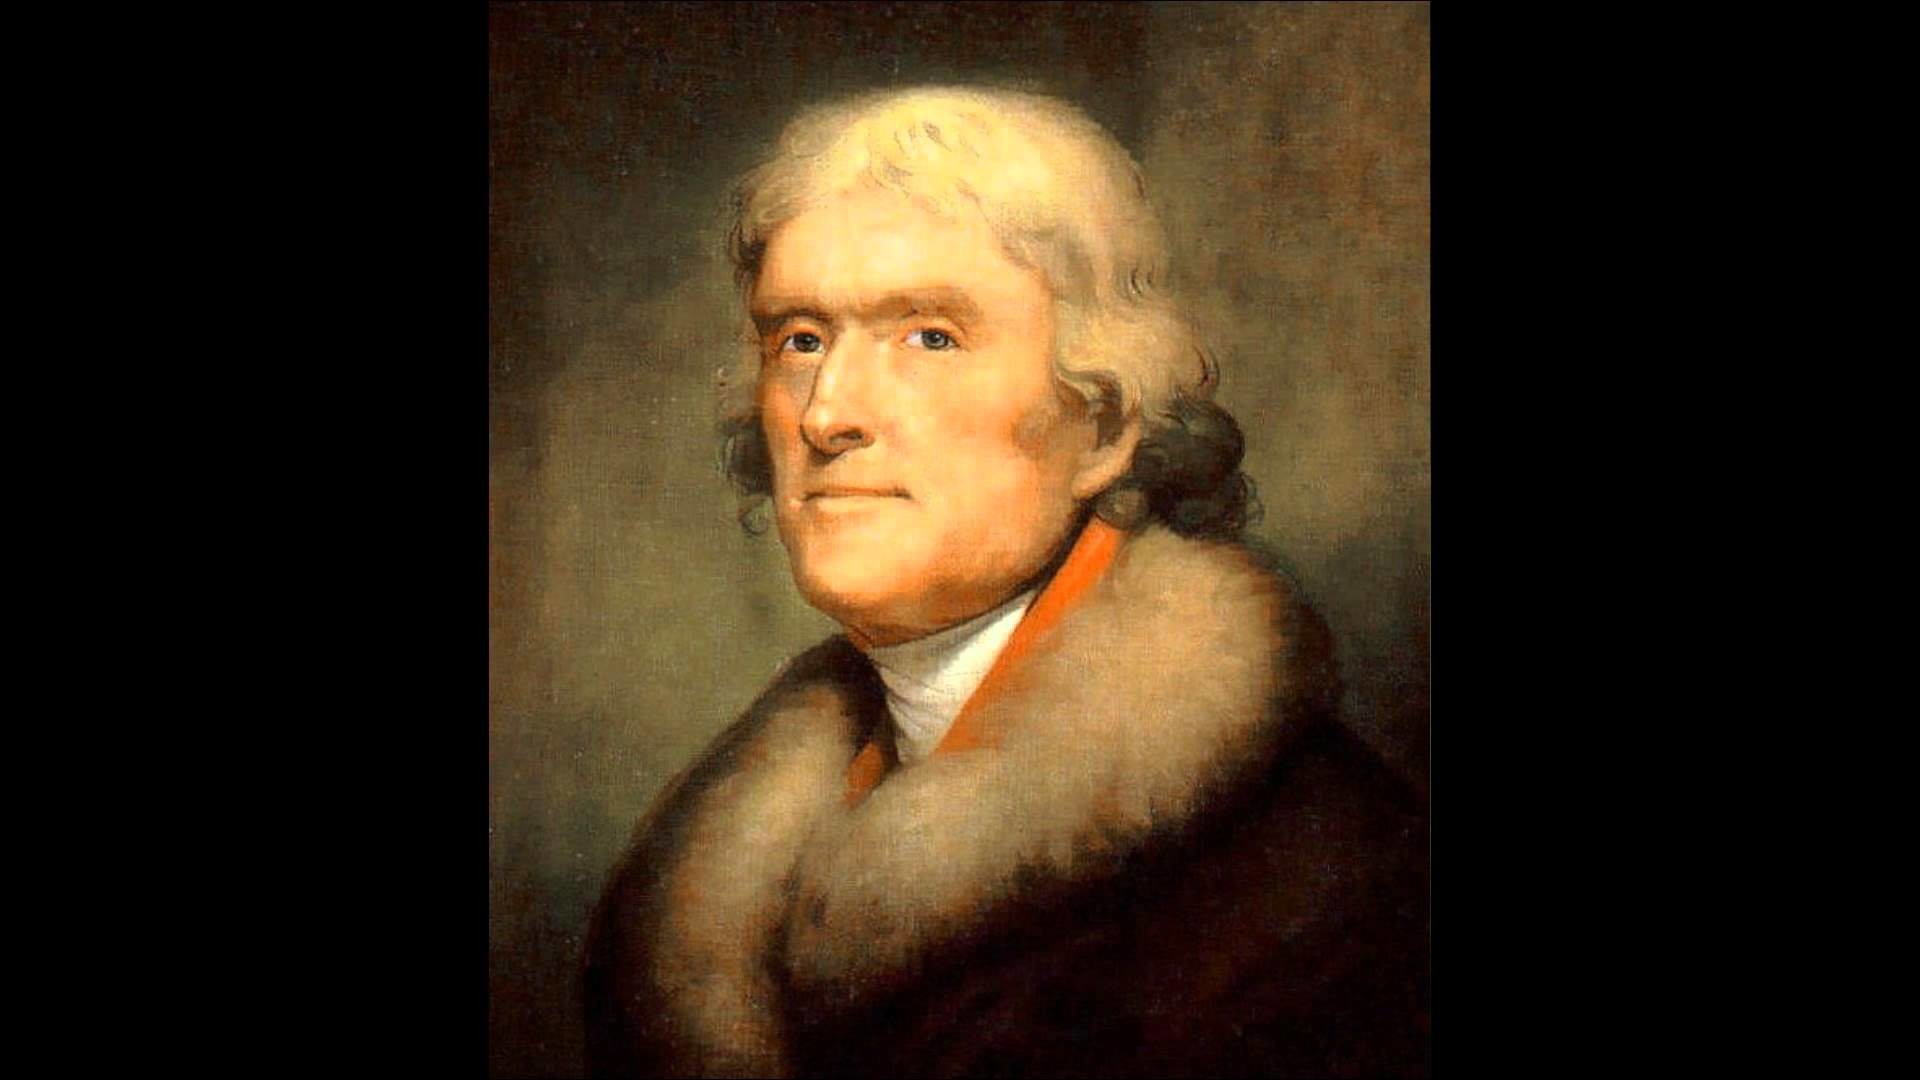 1920x1080 Bill Barker as Thomas Jefferson Monticello Podcasts Thomas Jefferson to  Roger C. Weightman, June